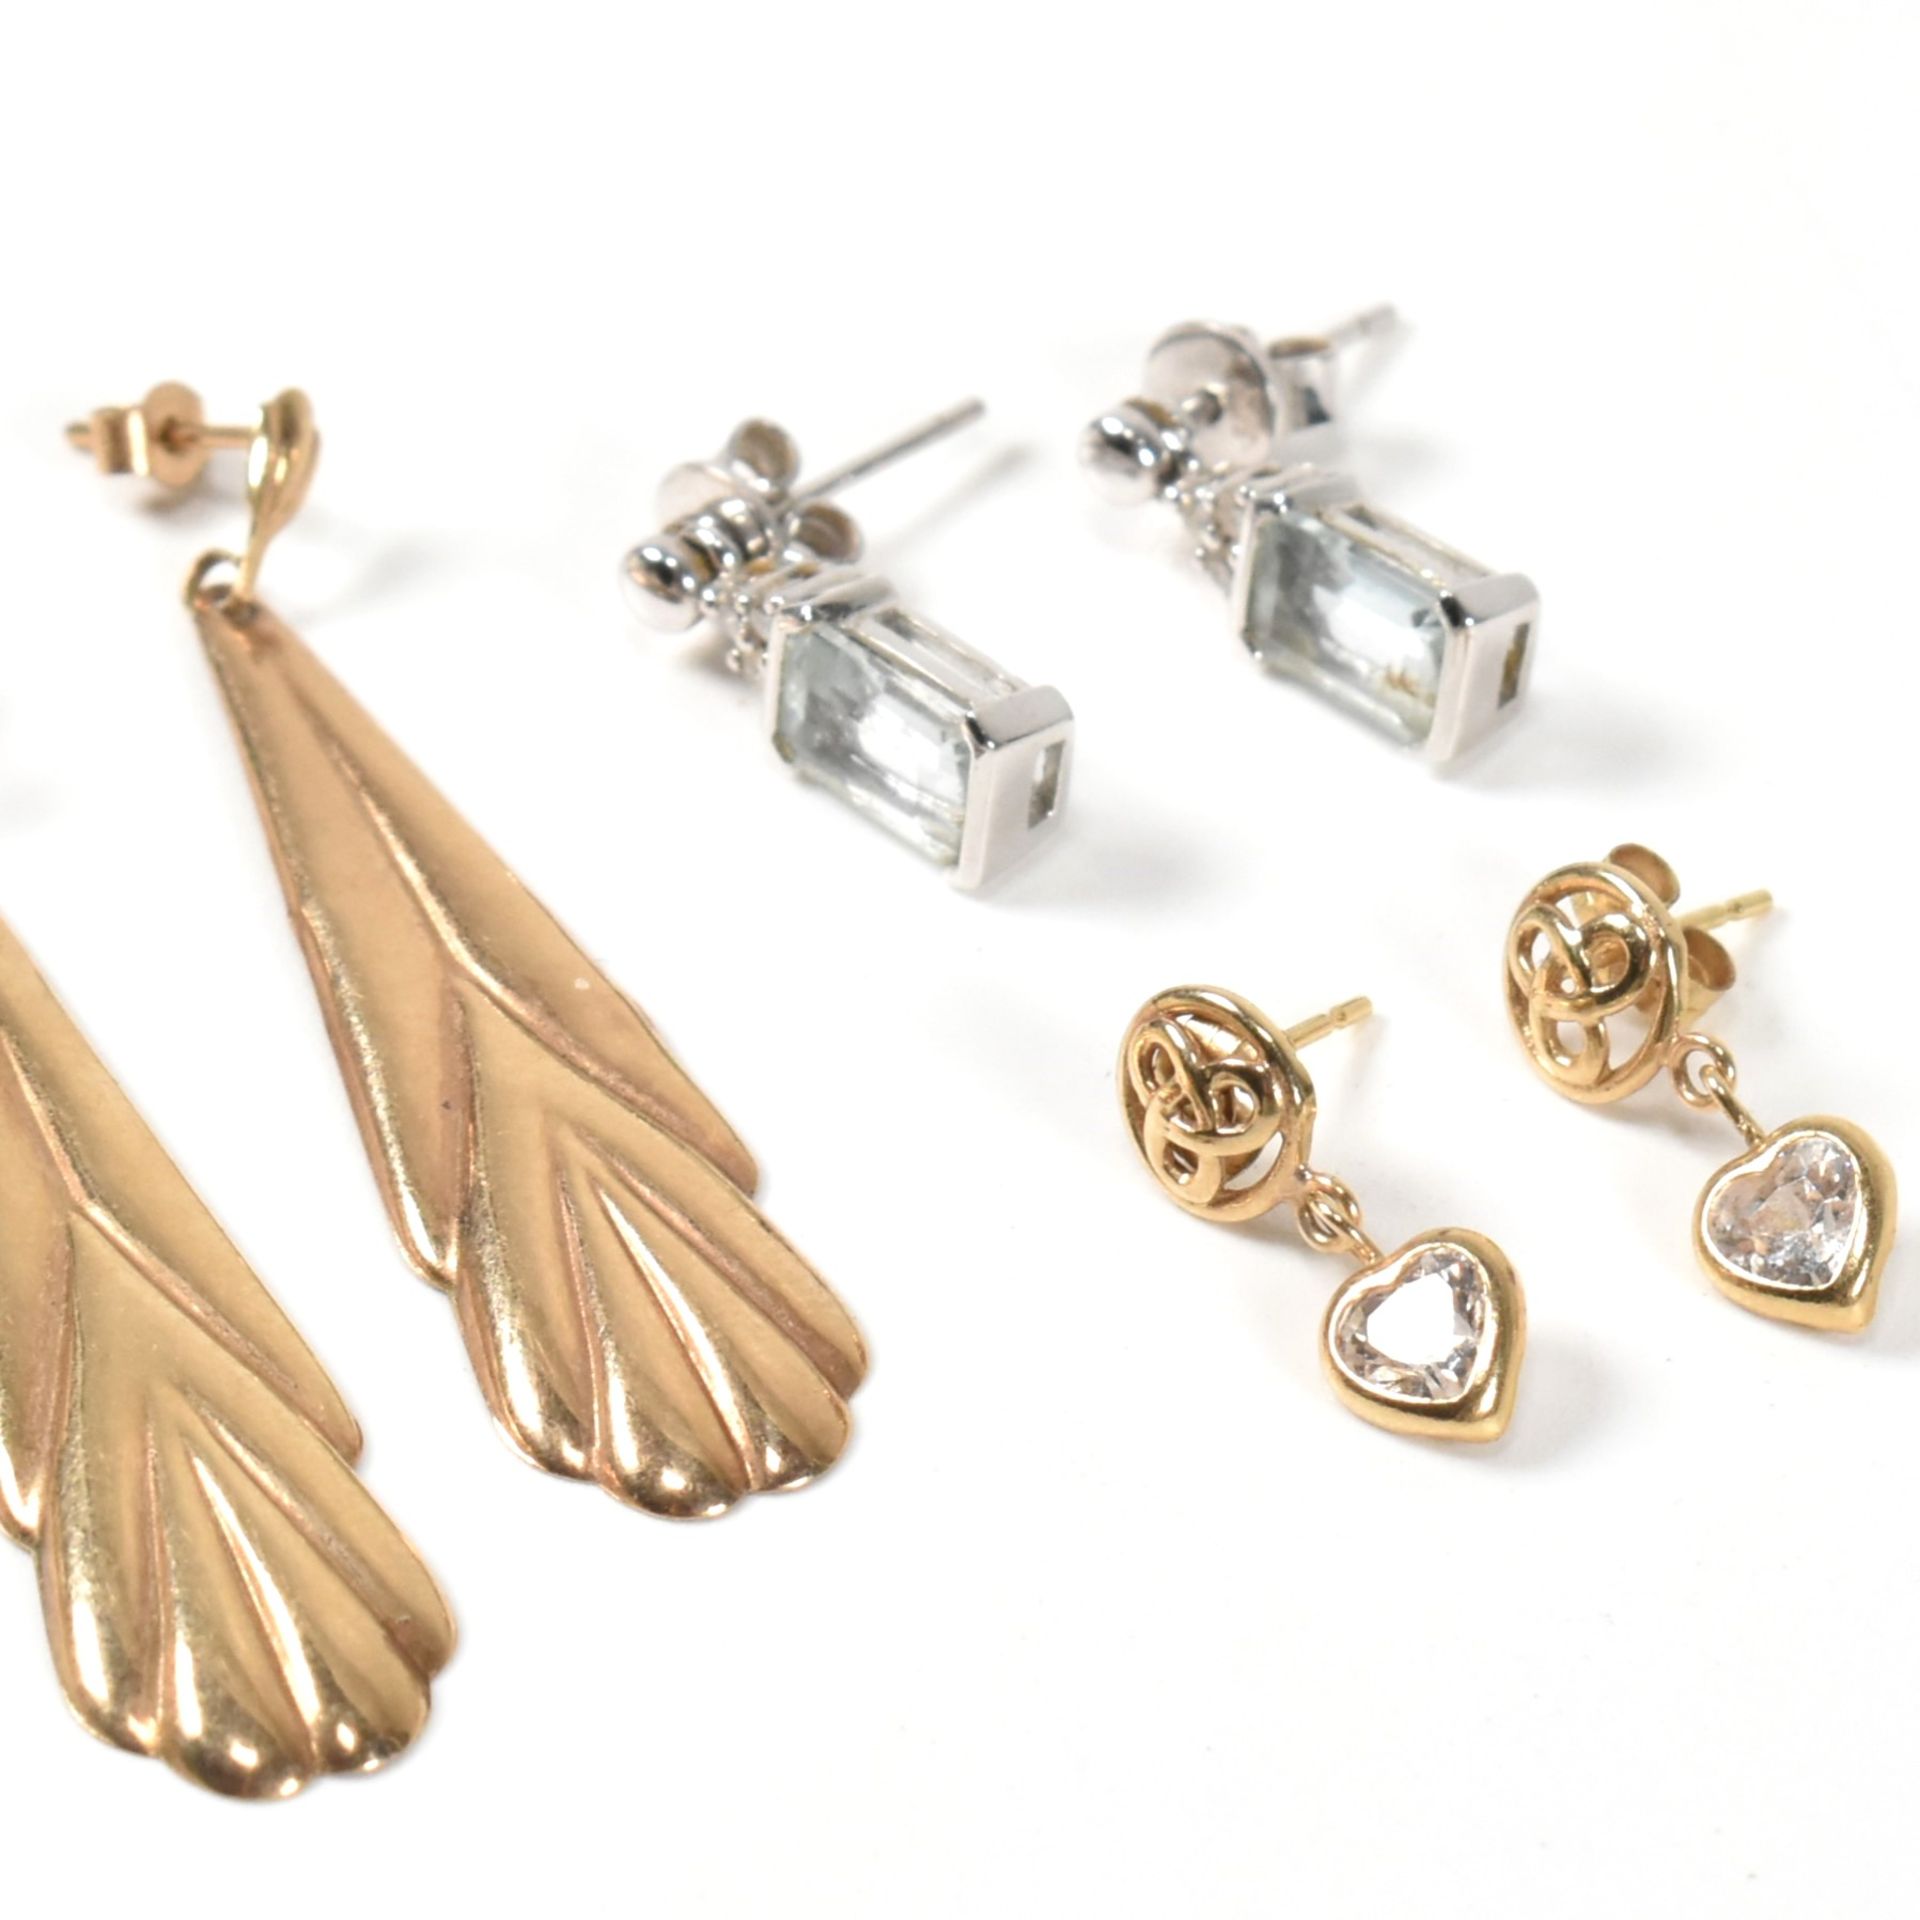 COLLECTION OF 9CT GOLD EARRINGS & NECKLACE PENDANT - Image 3 of 4